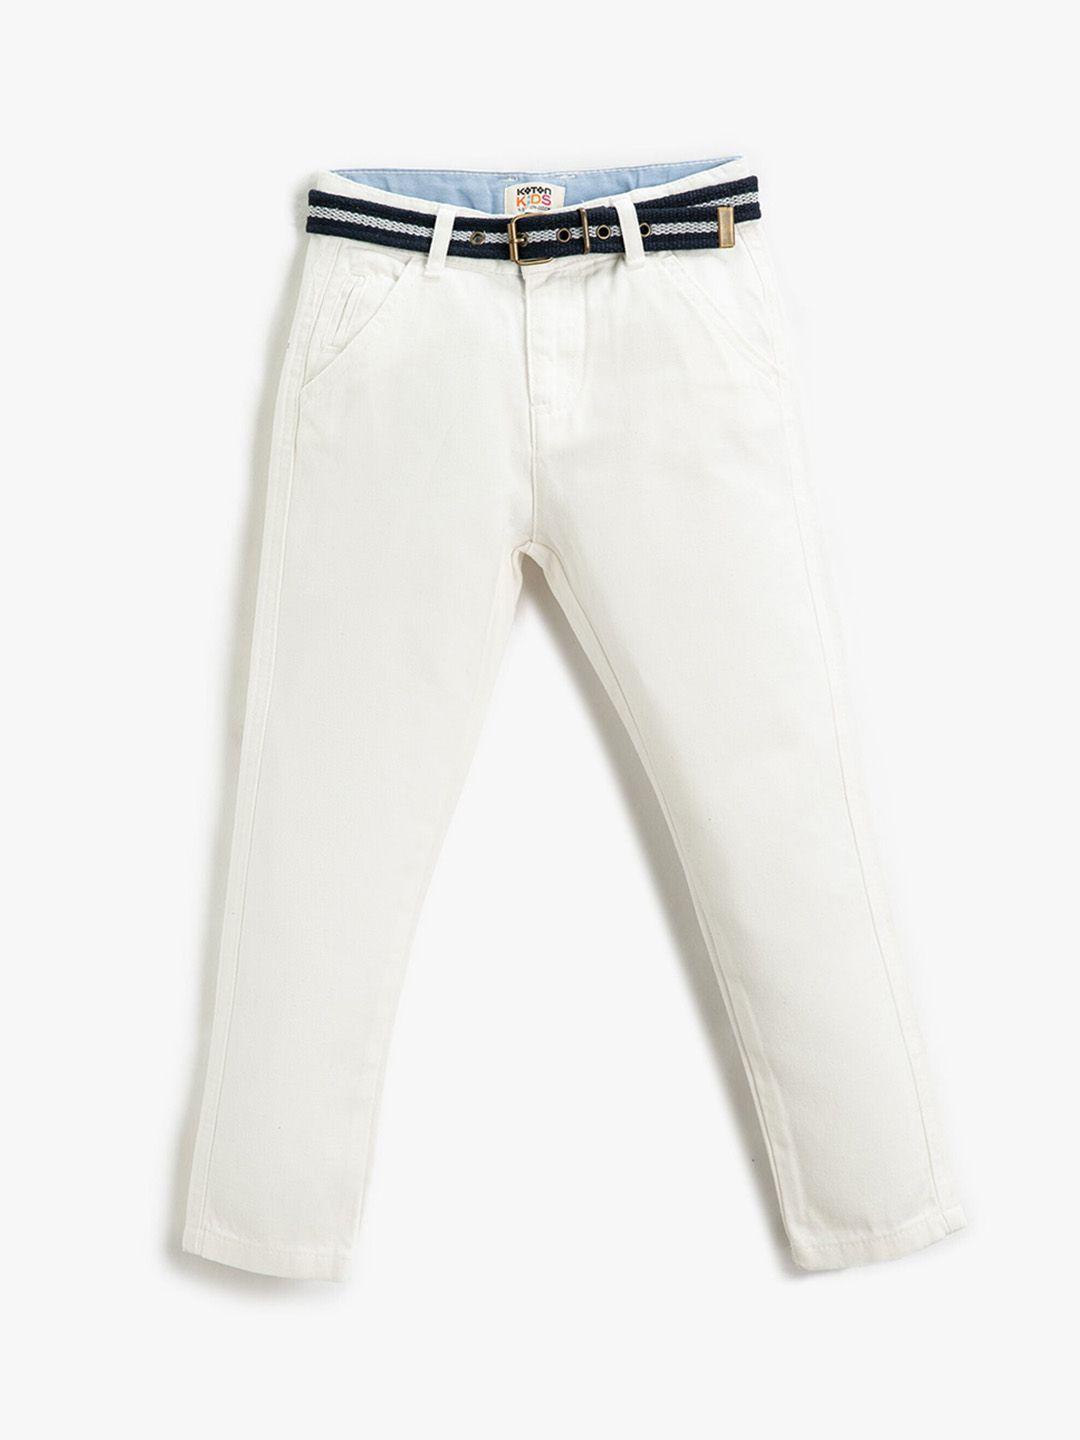 koton-boys-mid-rise-chinos-trousers-with-belt